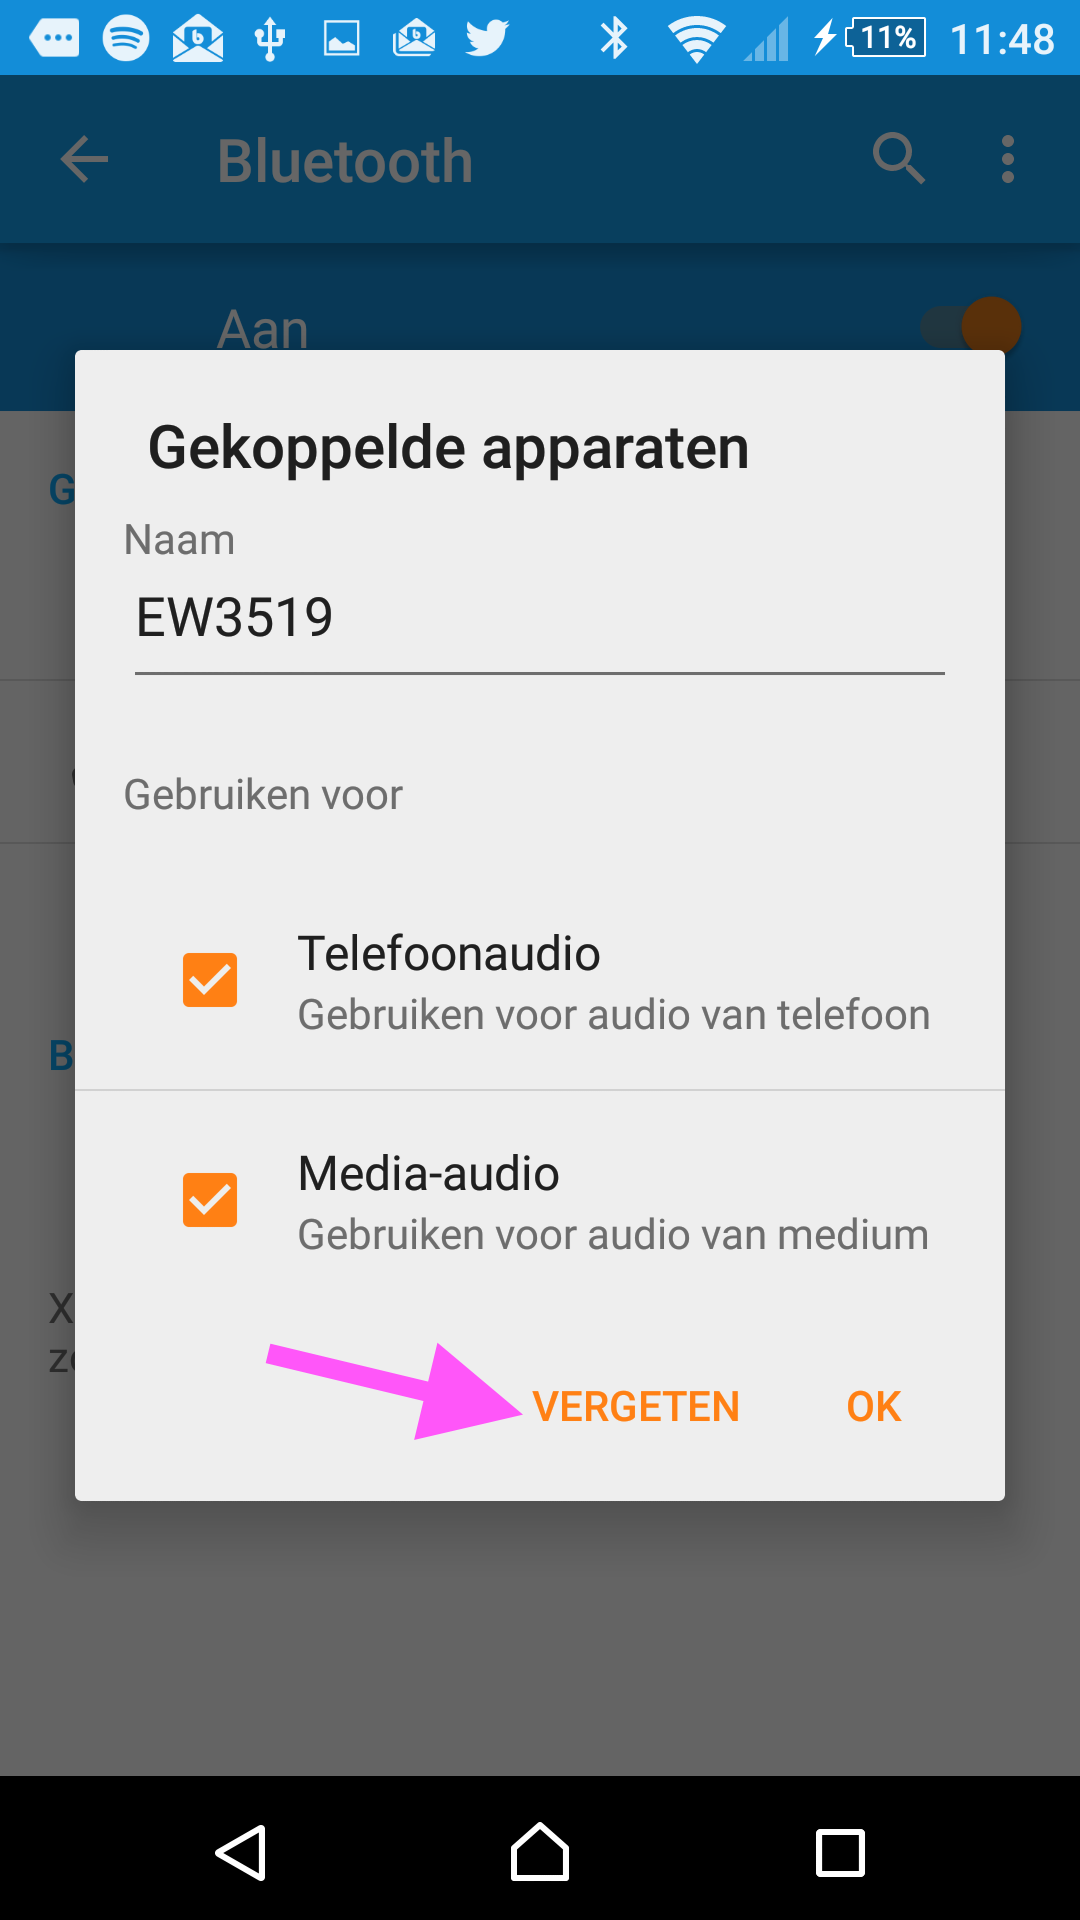 Bluetooth on Android 7